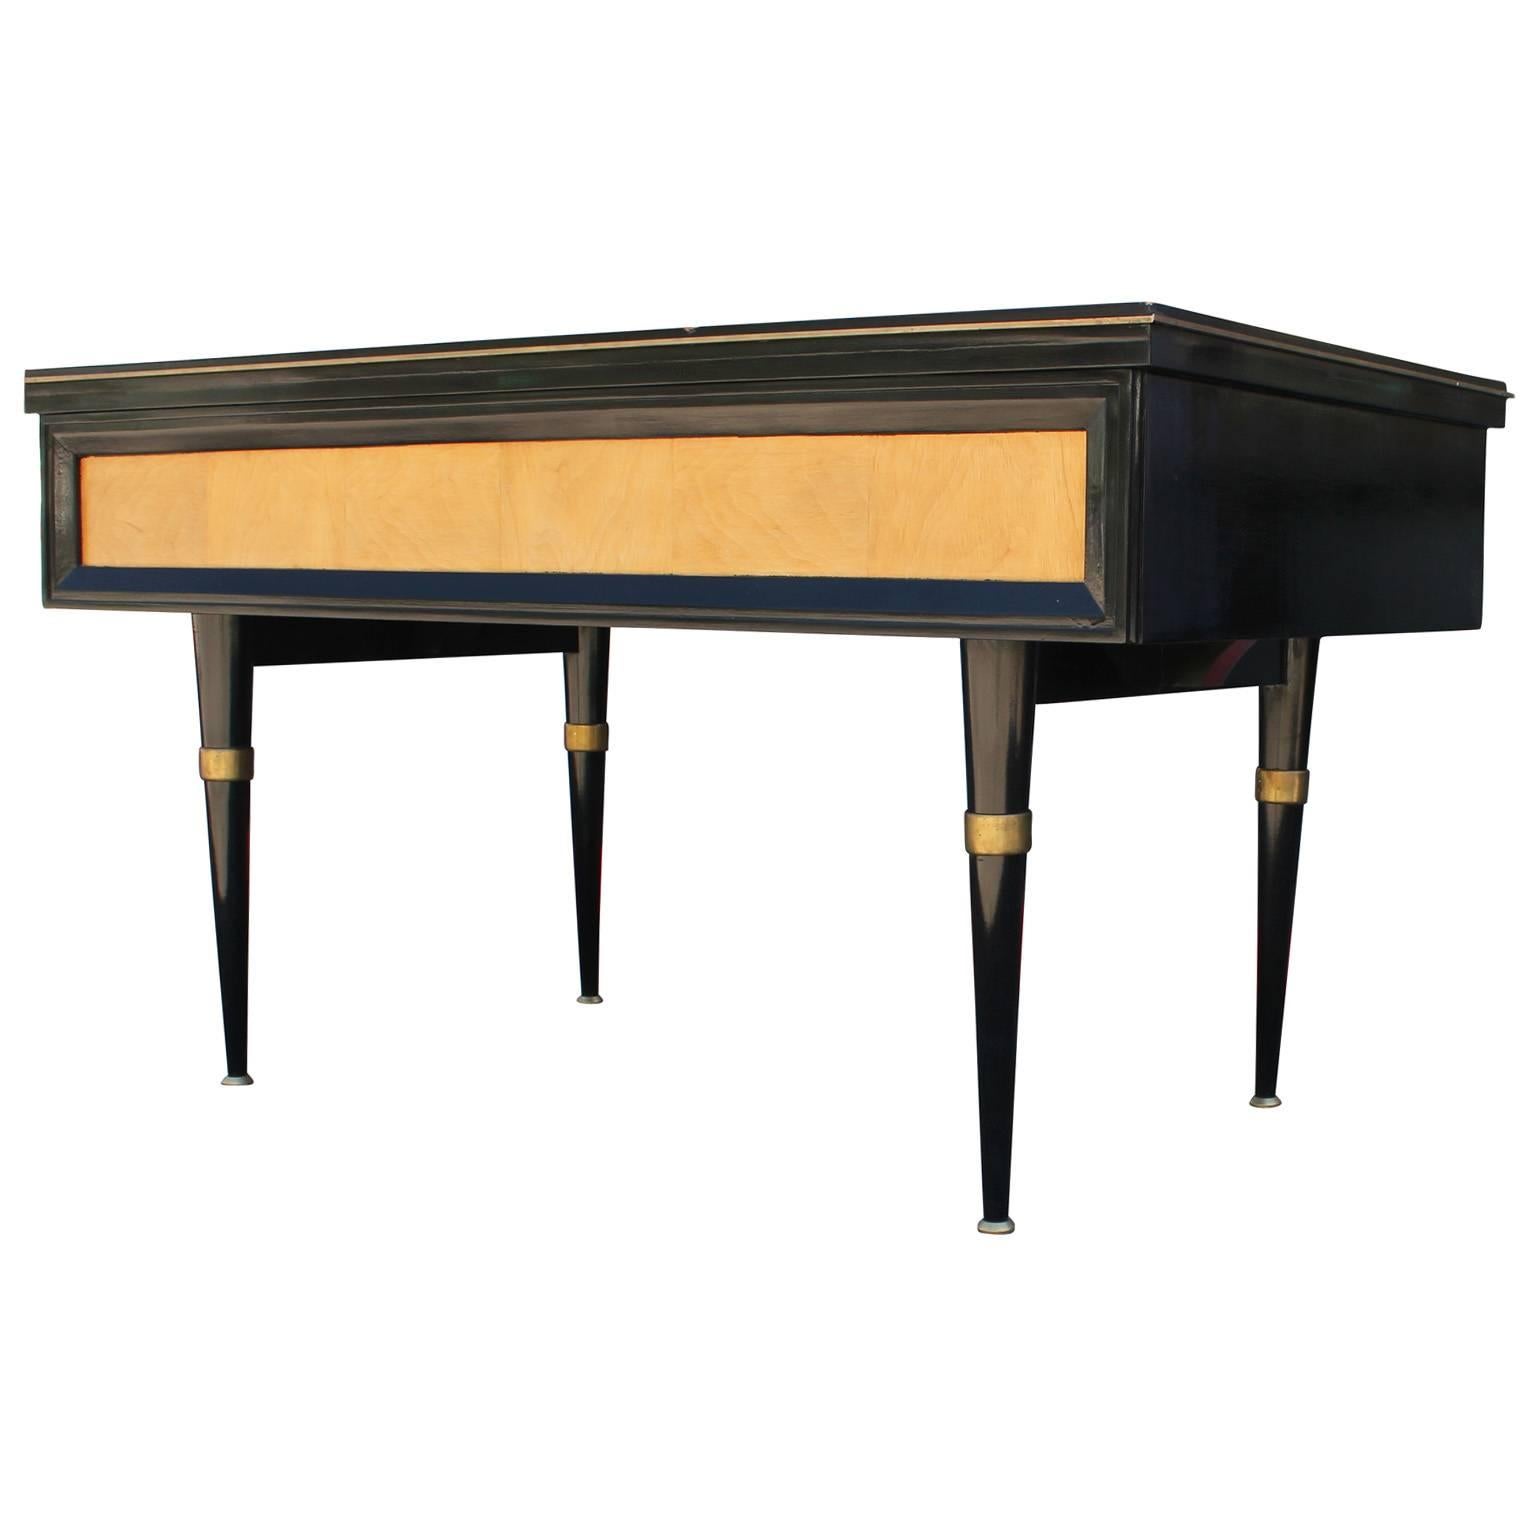 Mid-20th Century Modern Black Lacquer Executive Desk with Brass Accents and Green Writing Surface